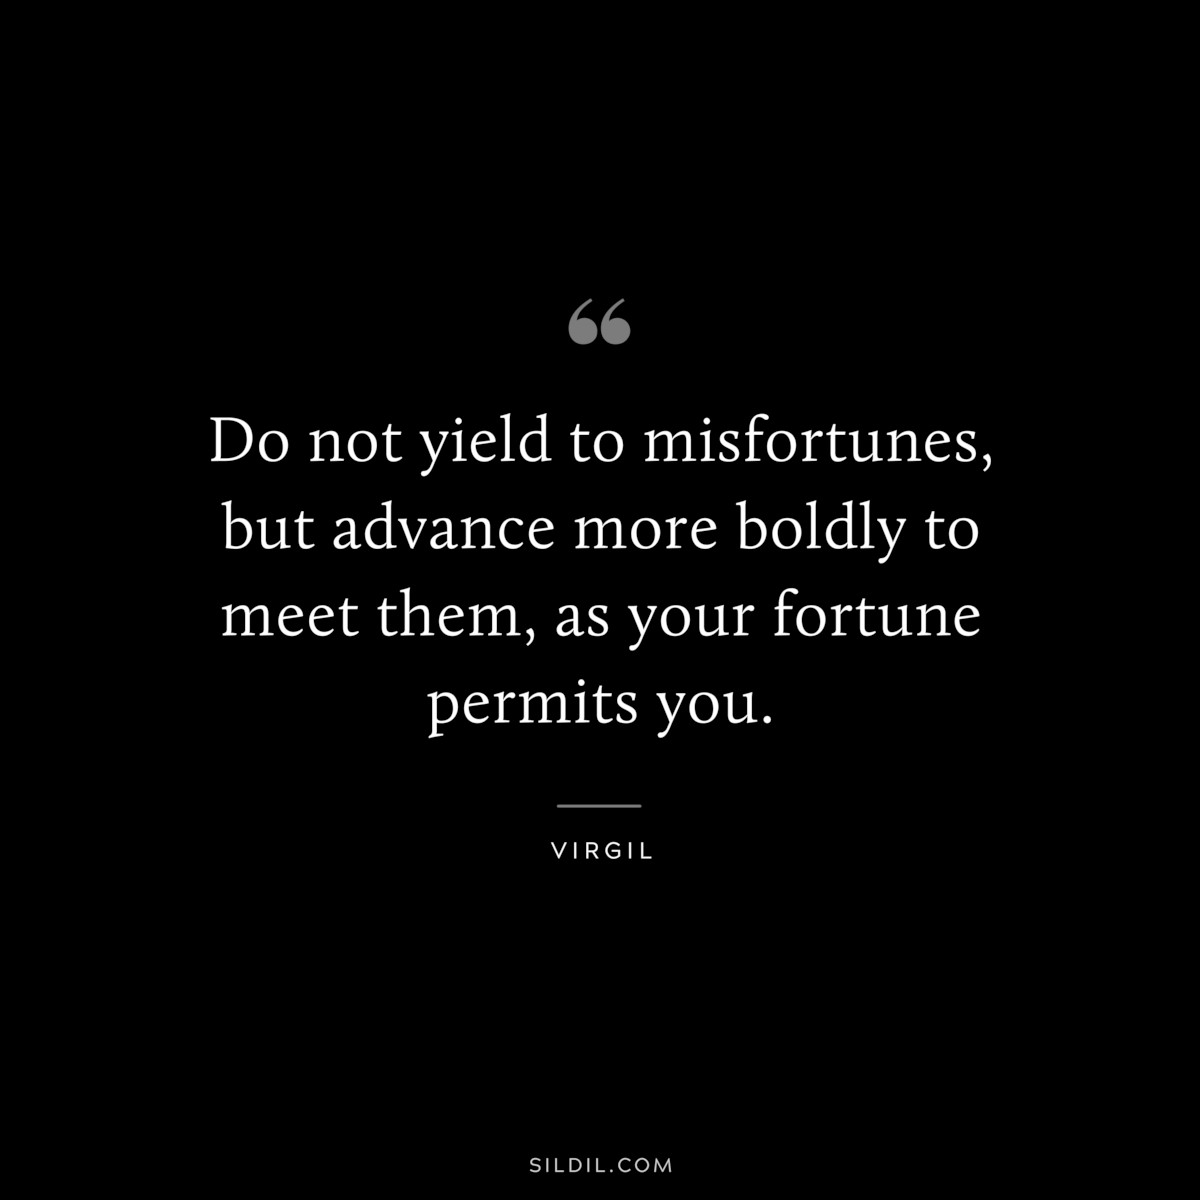 Do not yield to misfortunes, but advance more boldly to meet them, as your fortune permits you. ― Virgil